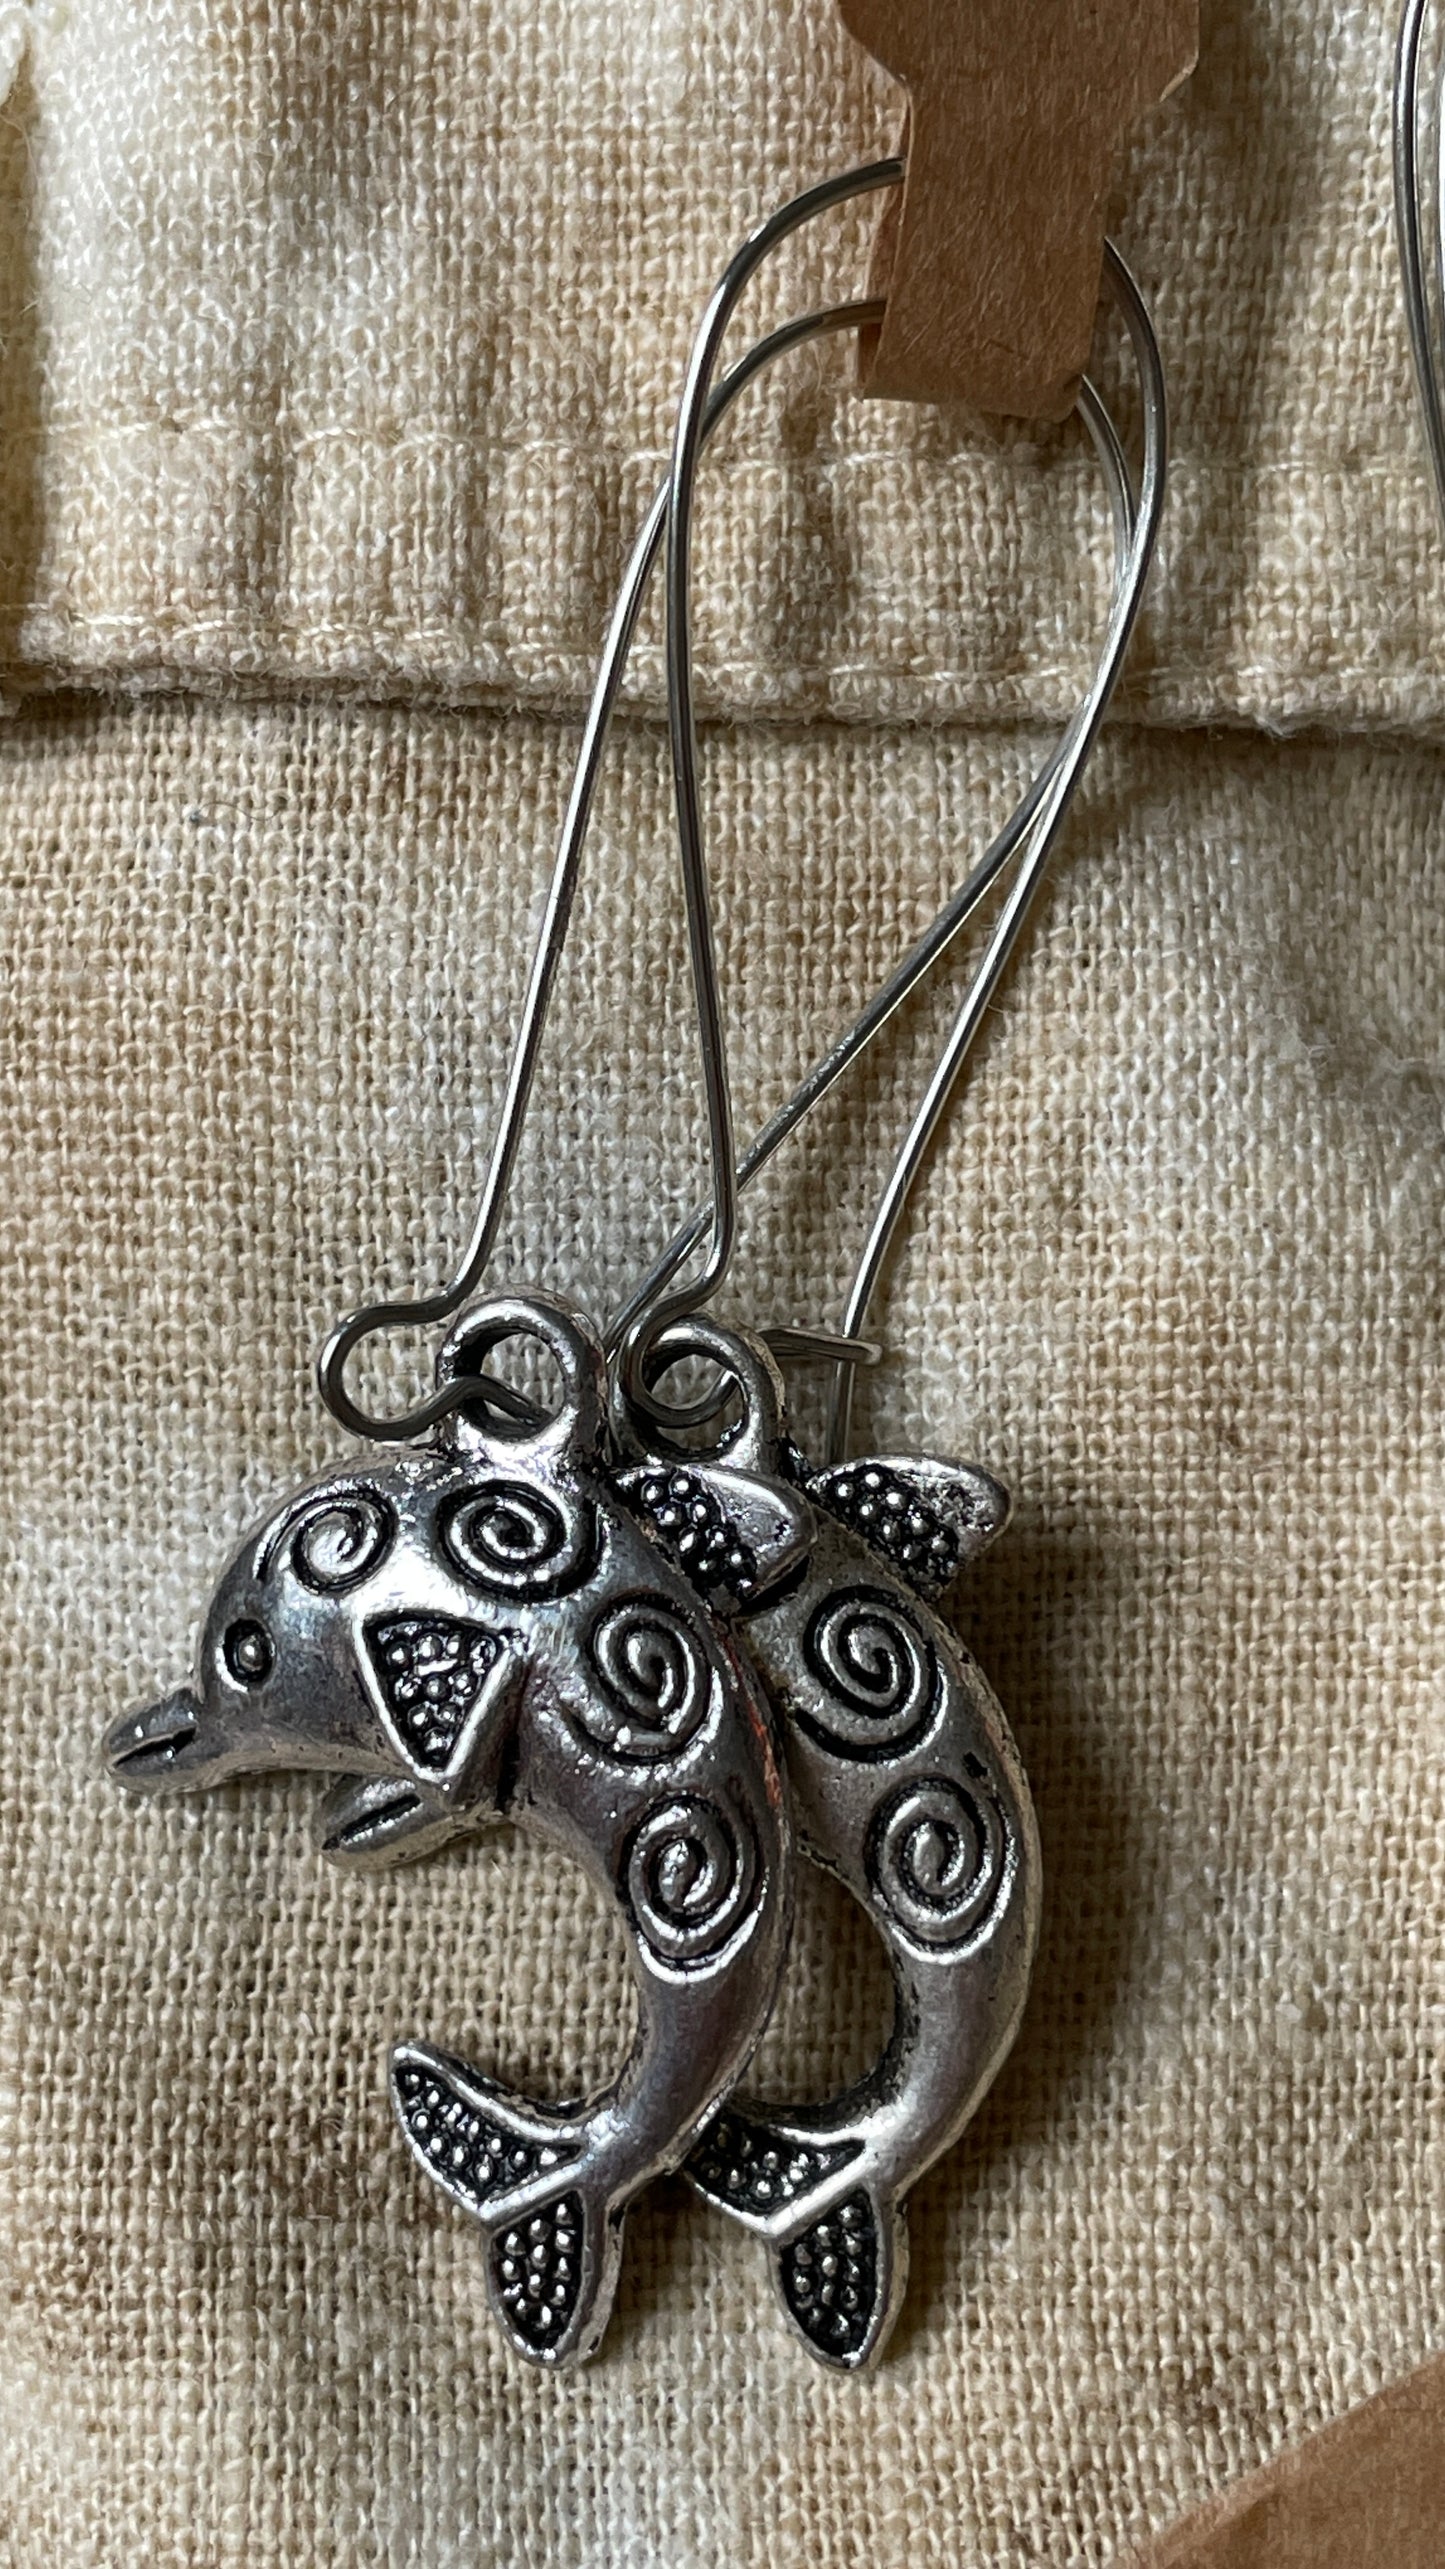 Indigo and Roses - Reworked earrings